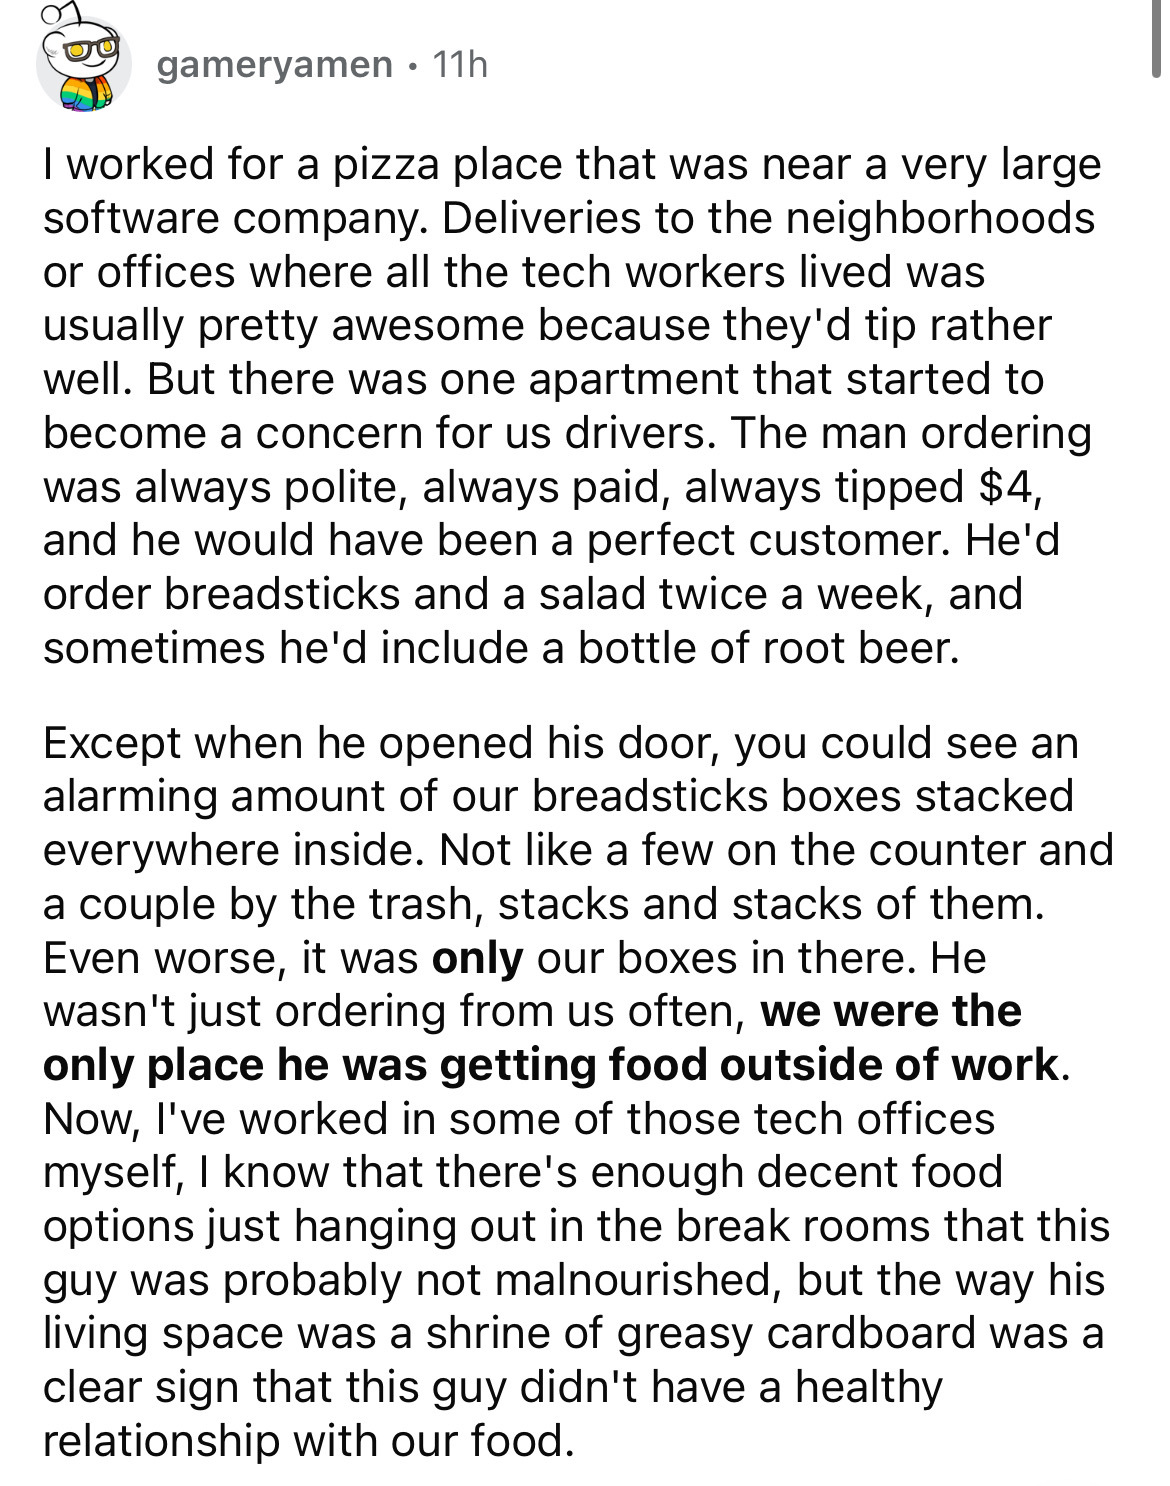 document - gameryamen. 11h I worked for a pizza place that was near a very large software company. Deliveries to the neighborhoods or offices where all the tech workers lived was usually pretty awesome because they'd tip rather well. But there was one apa